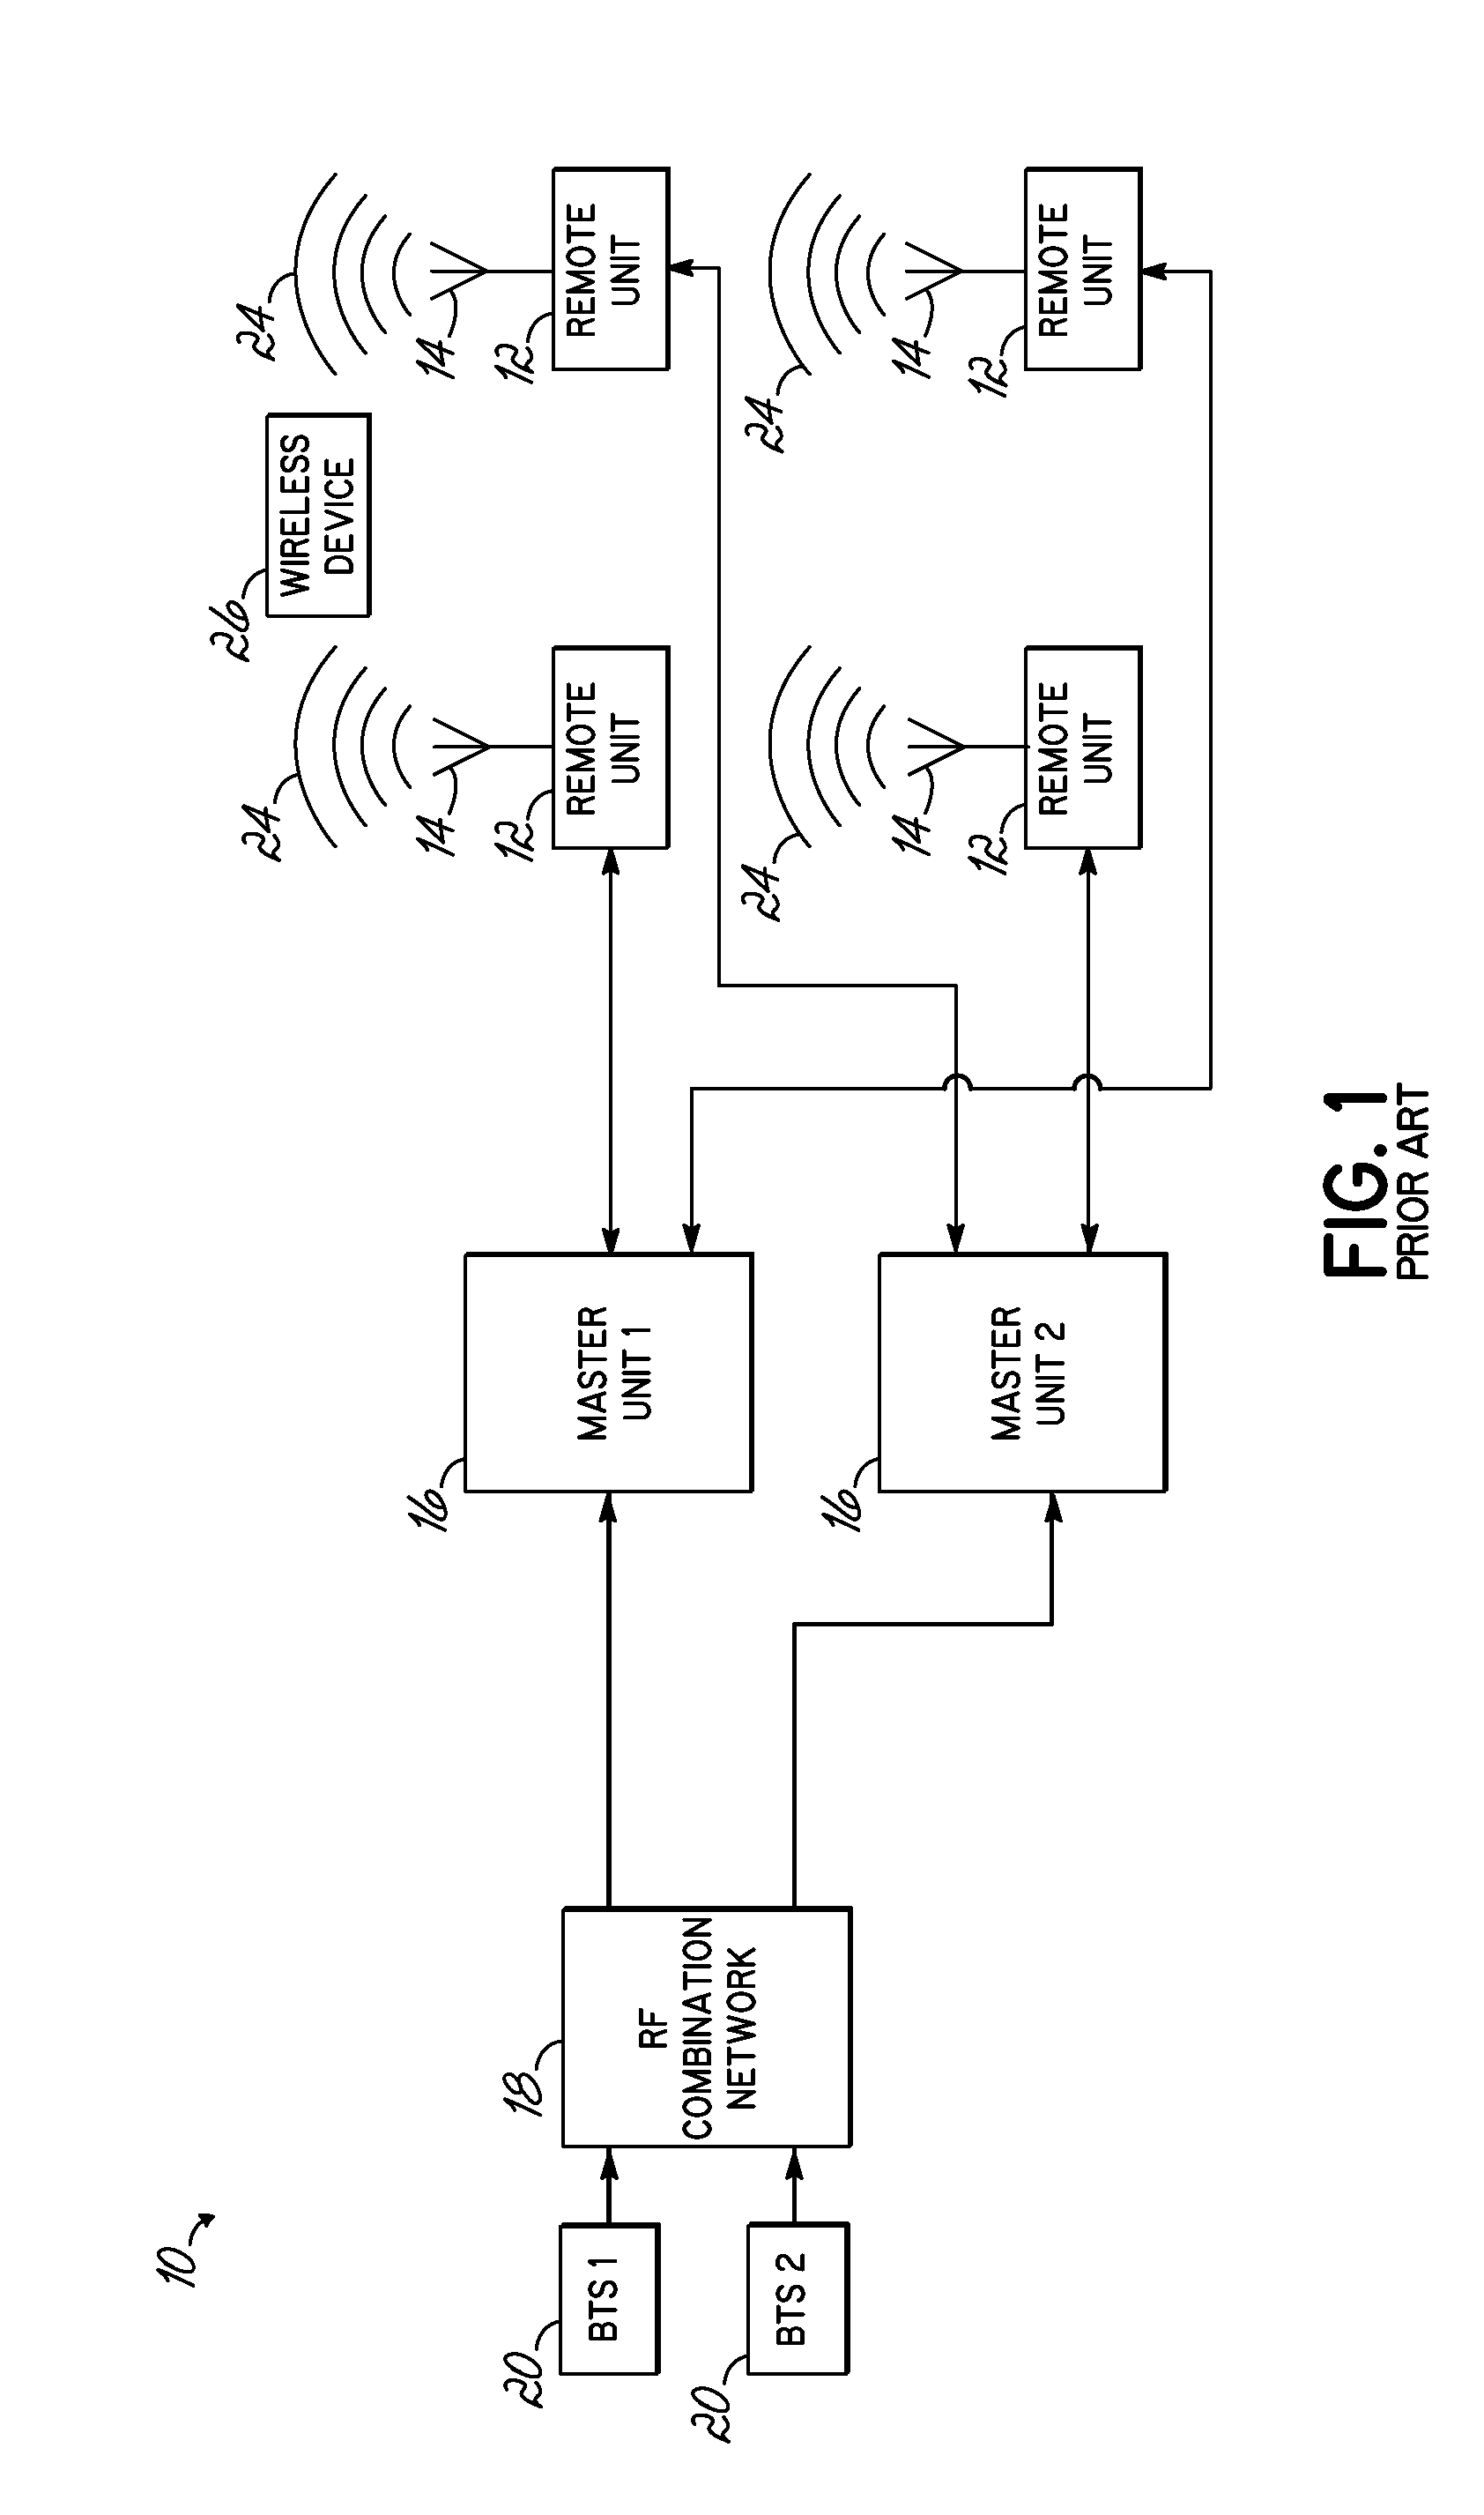 Distributed antenna system for MIMO signals